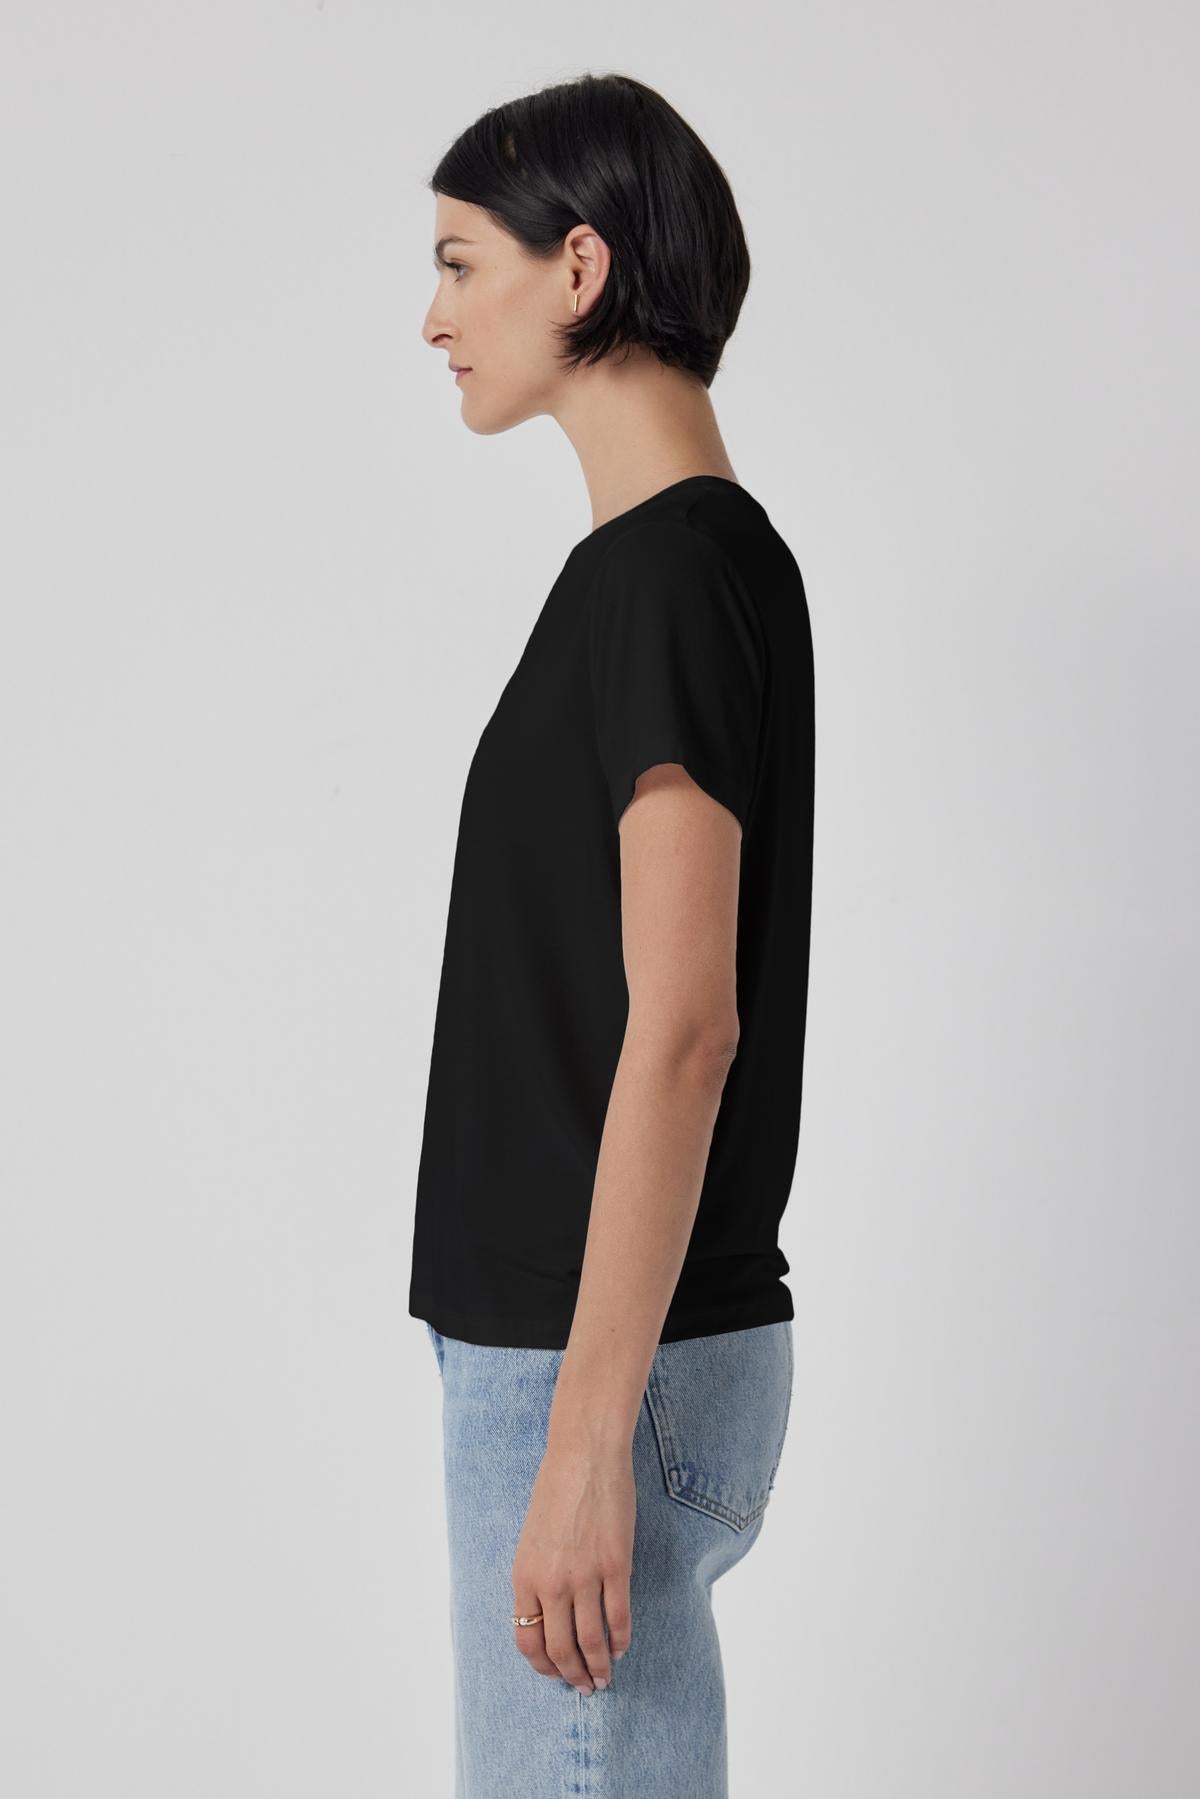 Woman standing in profile wearing a classic Solana Tee by Velvet by Jenny Graham and blue jeans against a gray background.-36463664038081